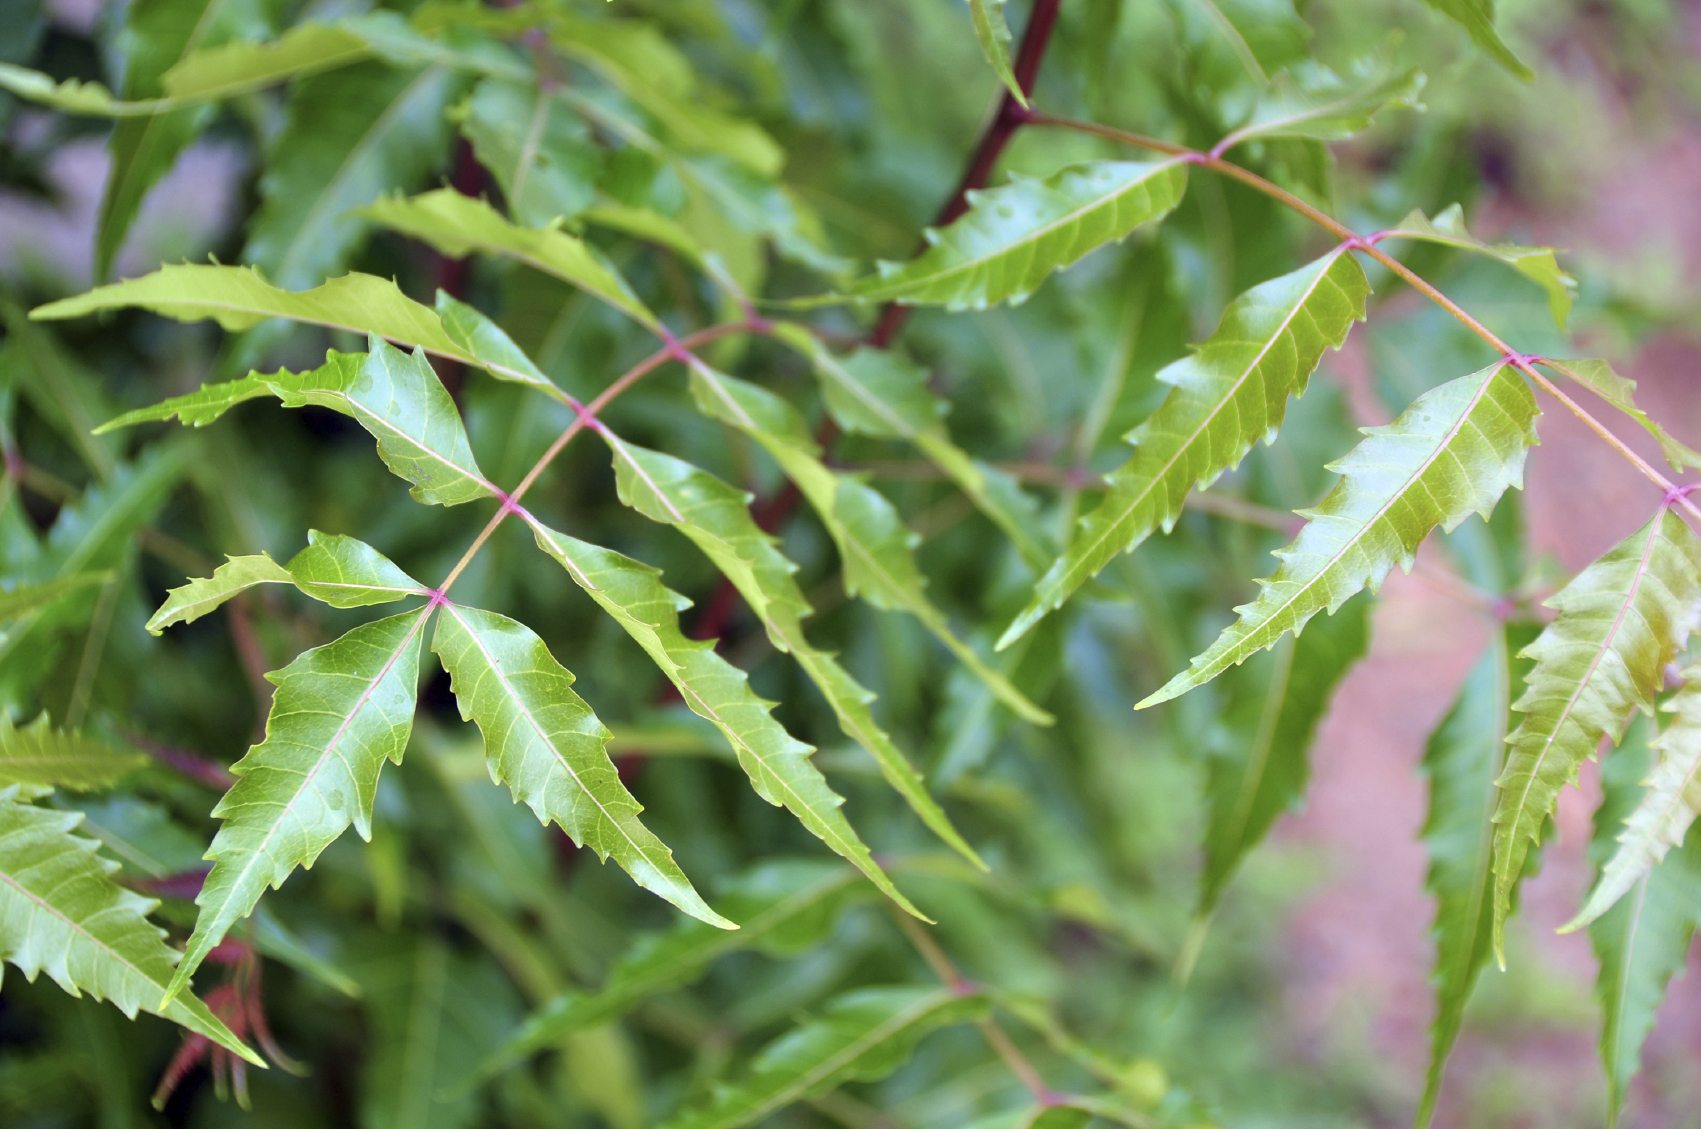 Neem Tree Growth And Care - Learn About Neem Tree Benefits And Uses